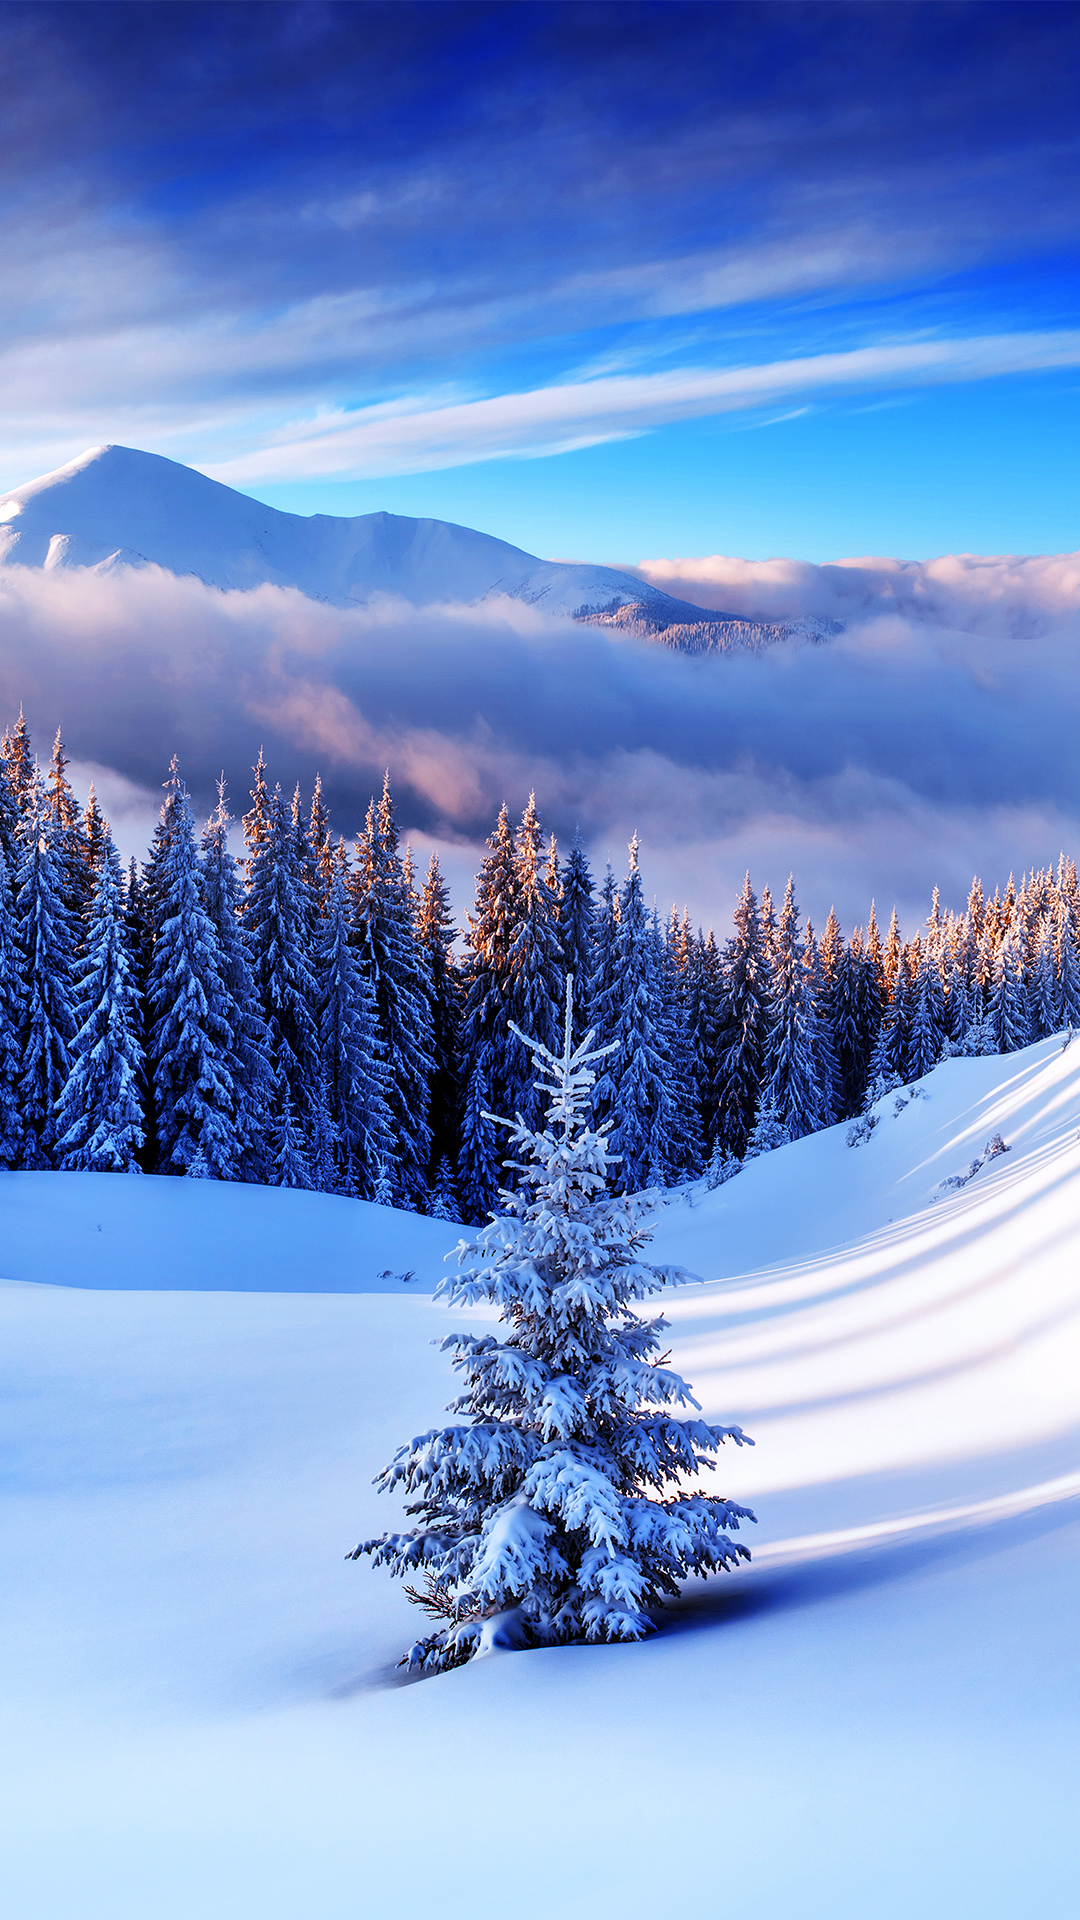 50 Winter Backgrounds You Can Download Free - Mashtrelo